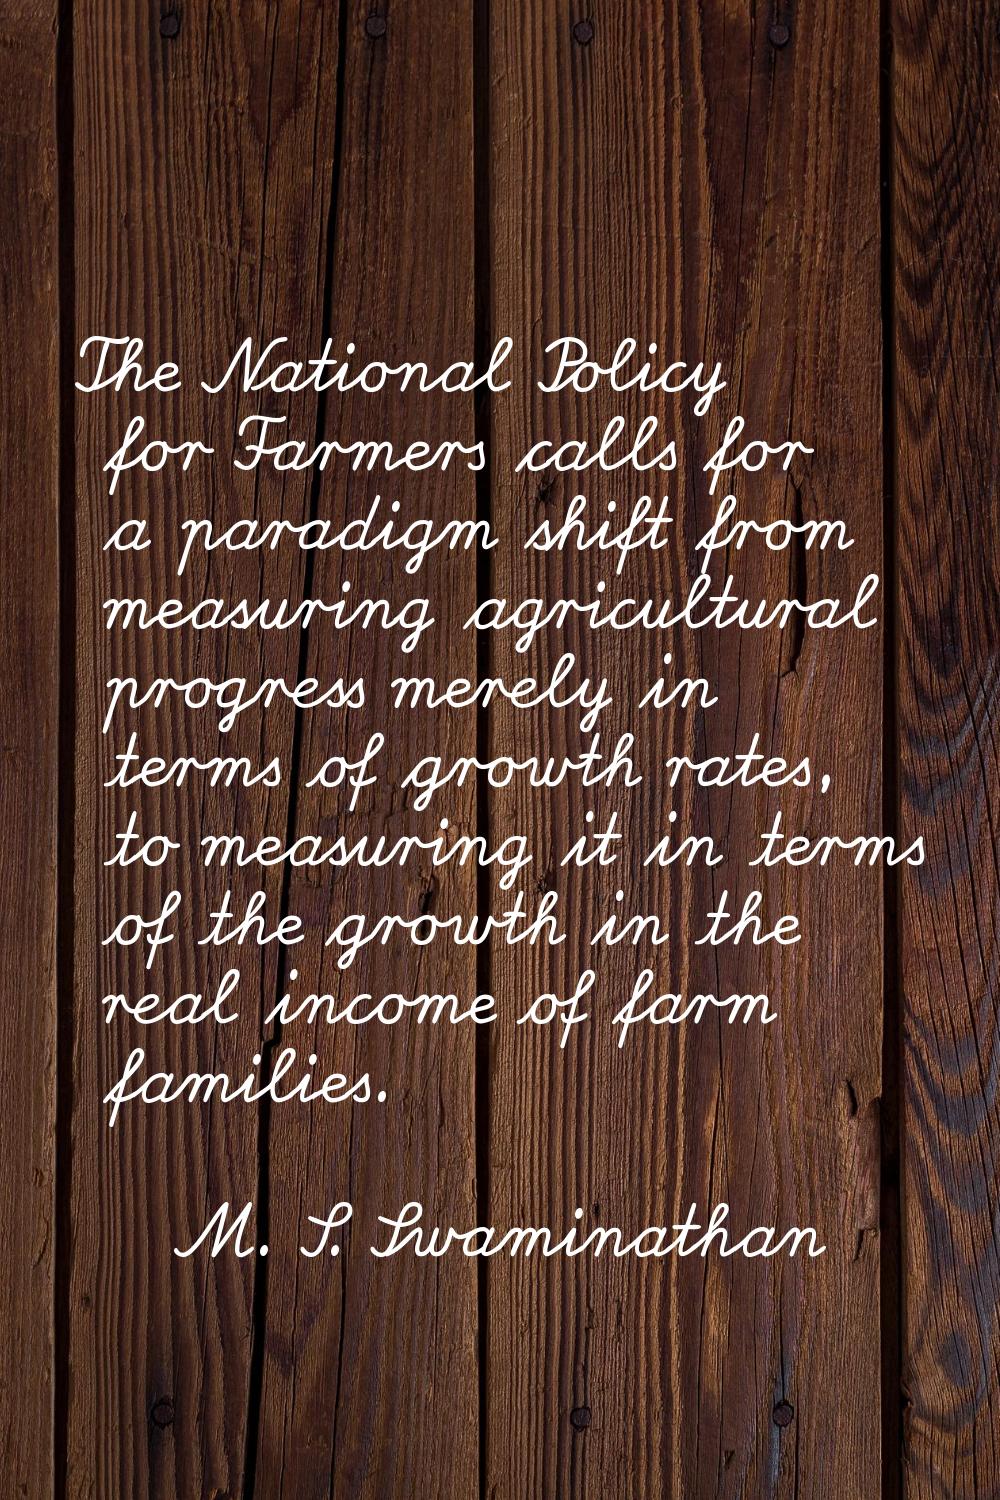 The National Policy for Farmers calls for a paradigm shift from measuring agricultural progress mer